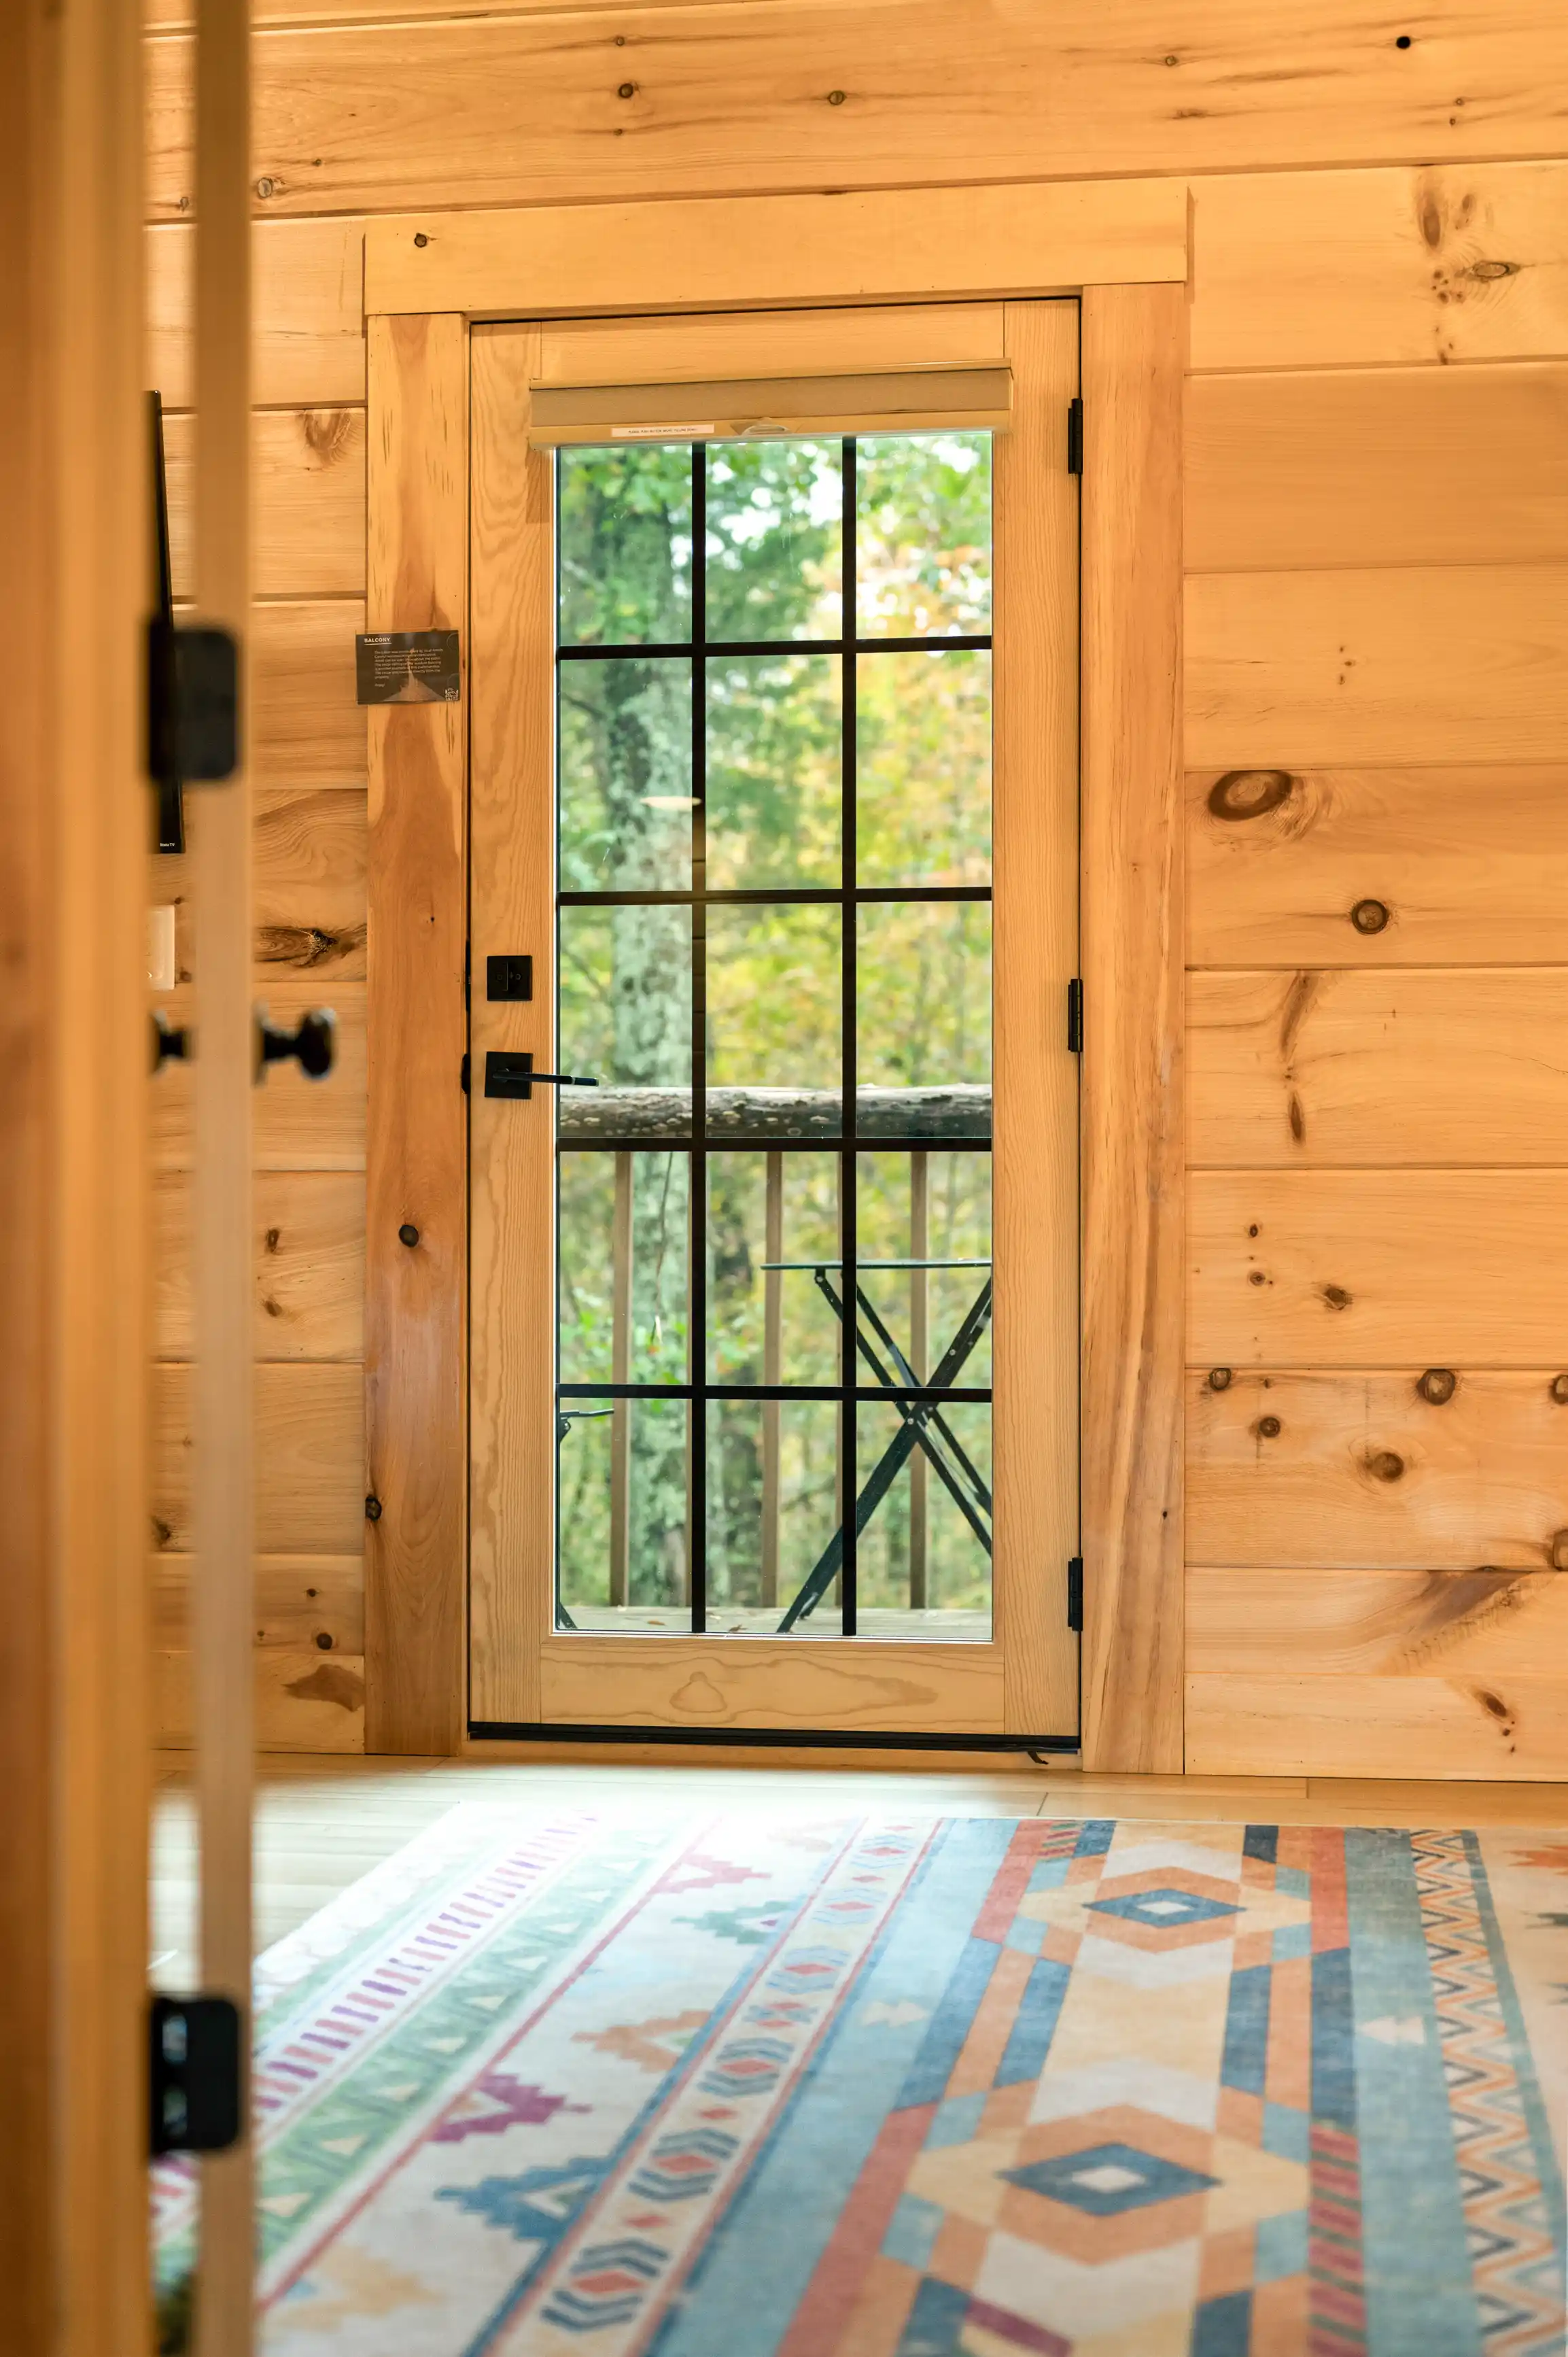 Wooden door with glass panes set in a natural wood-finished room, leading to an outdoor area, with a colorful patterned rug in the foreground.